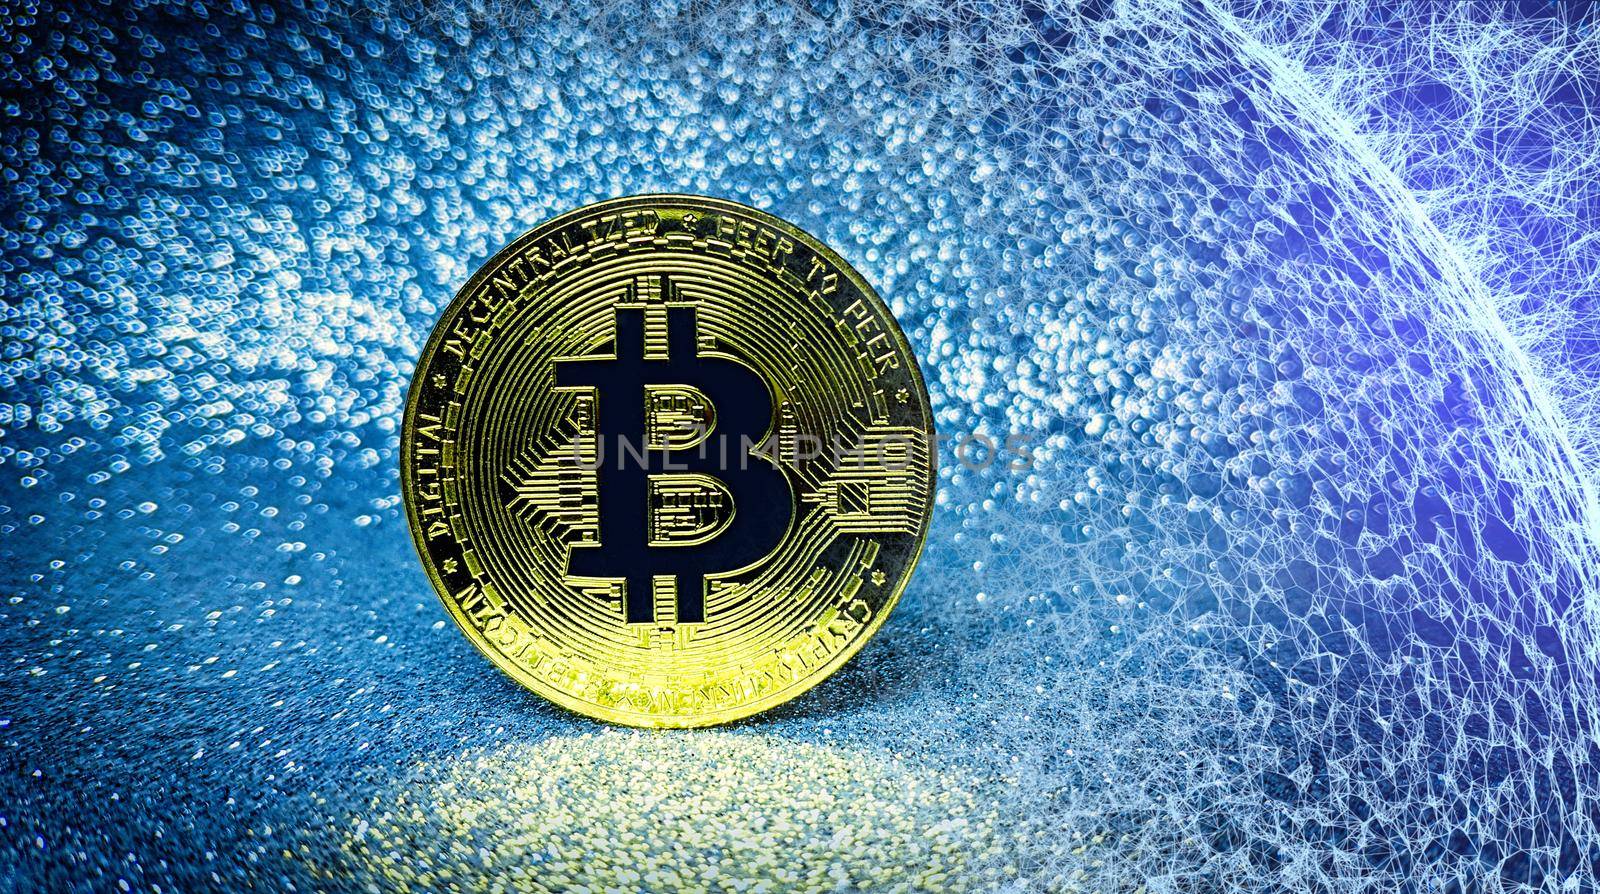 Bitcoin gold coin and defocused glitter background